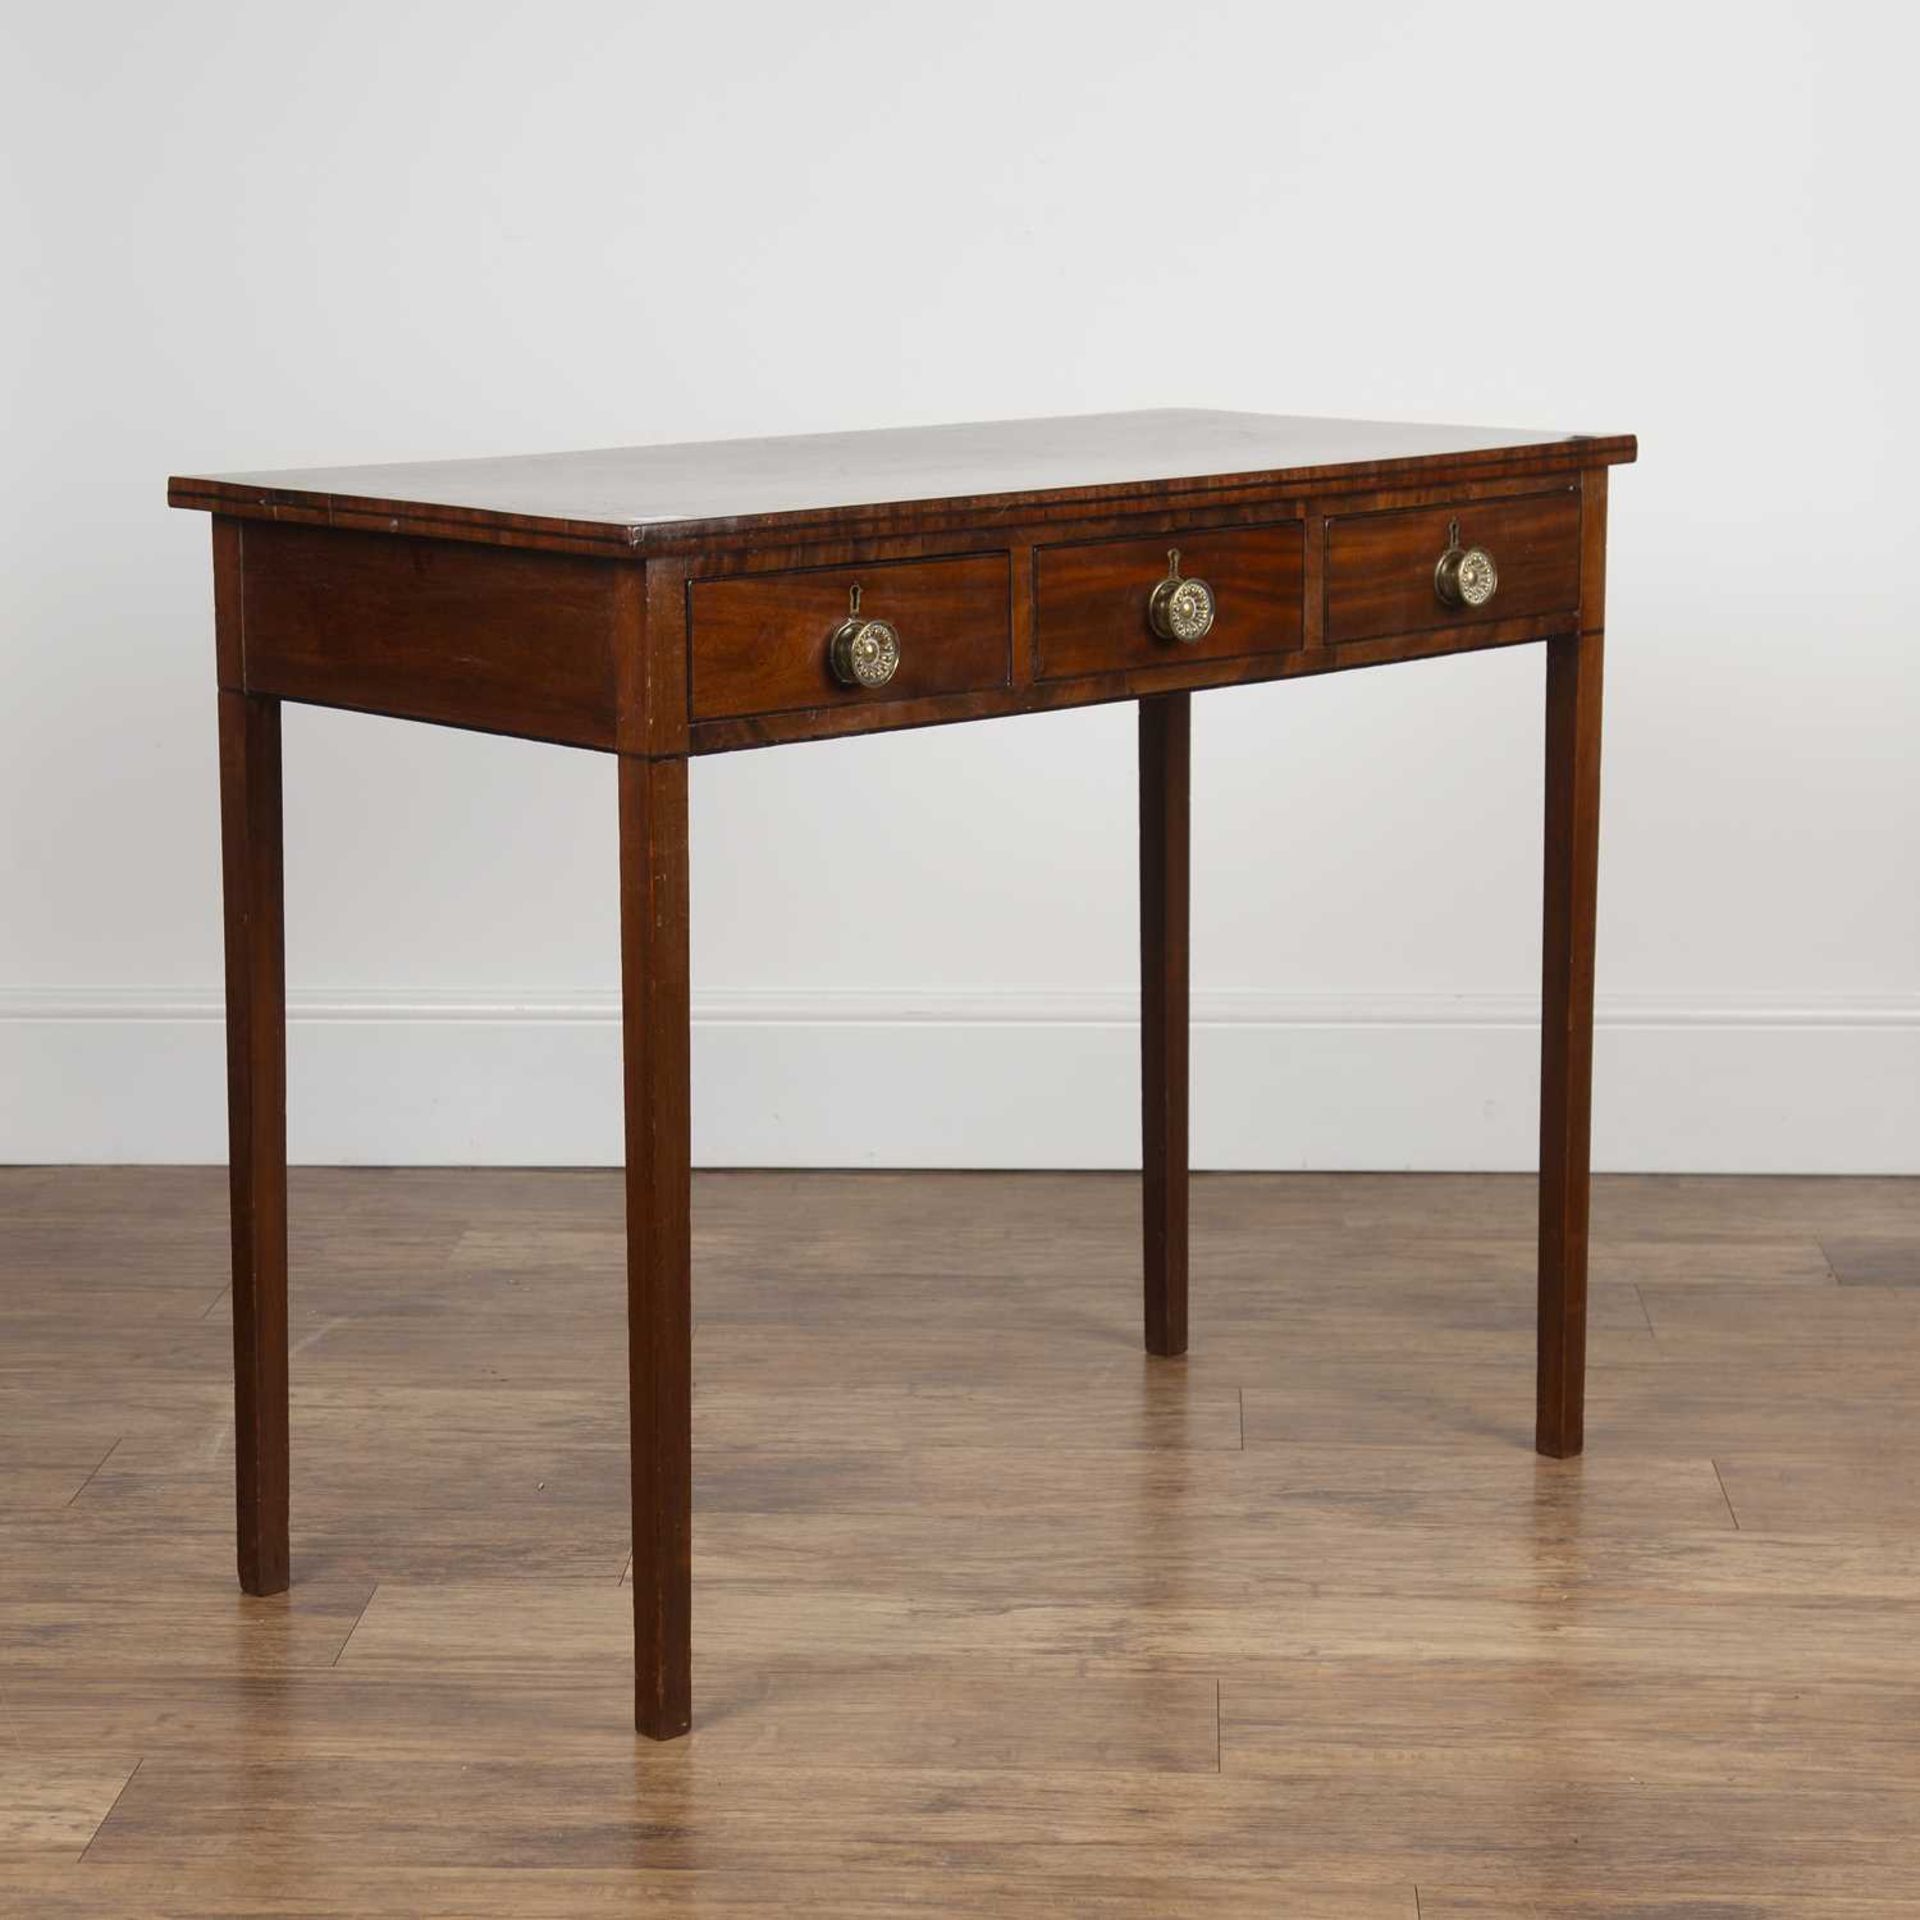 Mahogany side table 19th Century, fitted with three frieze drawers and round brass handles, standing - Image 2 of 6